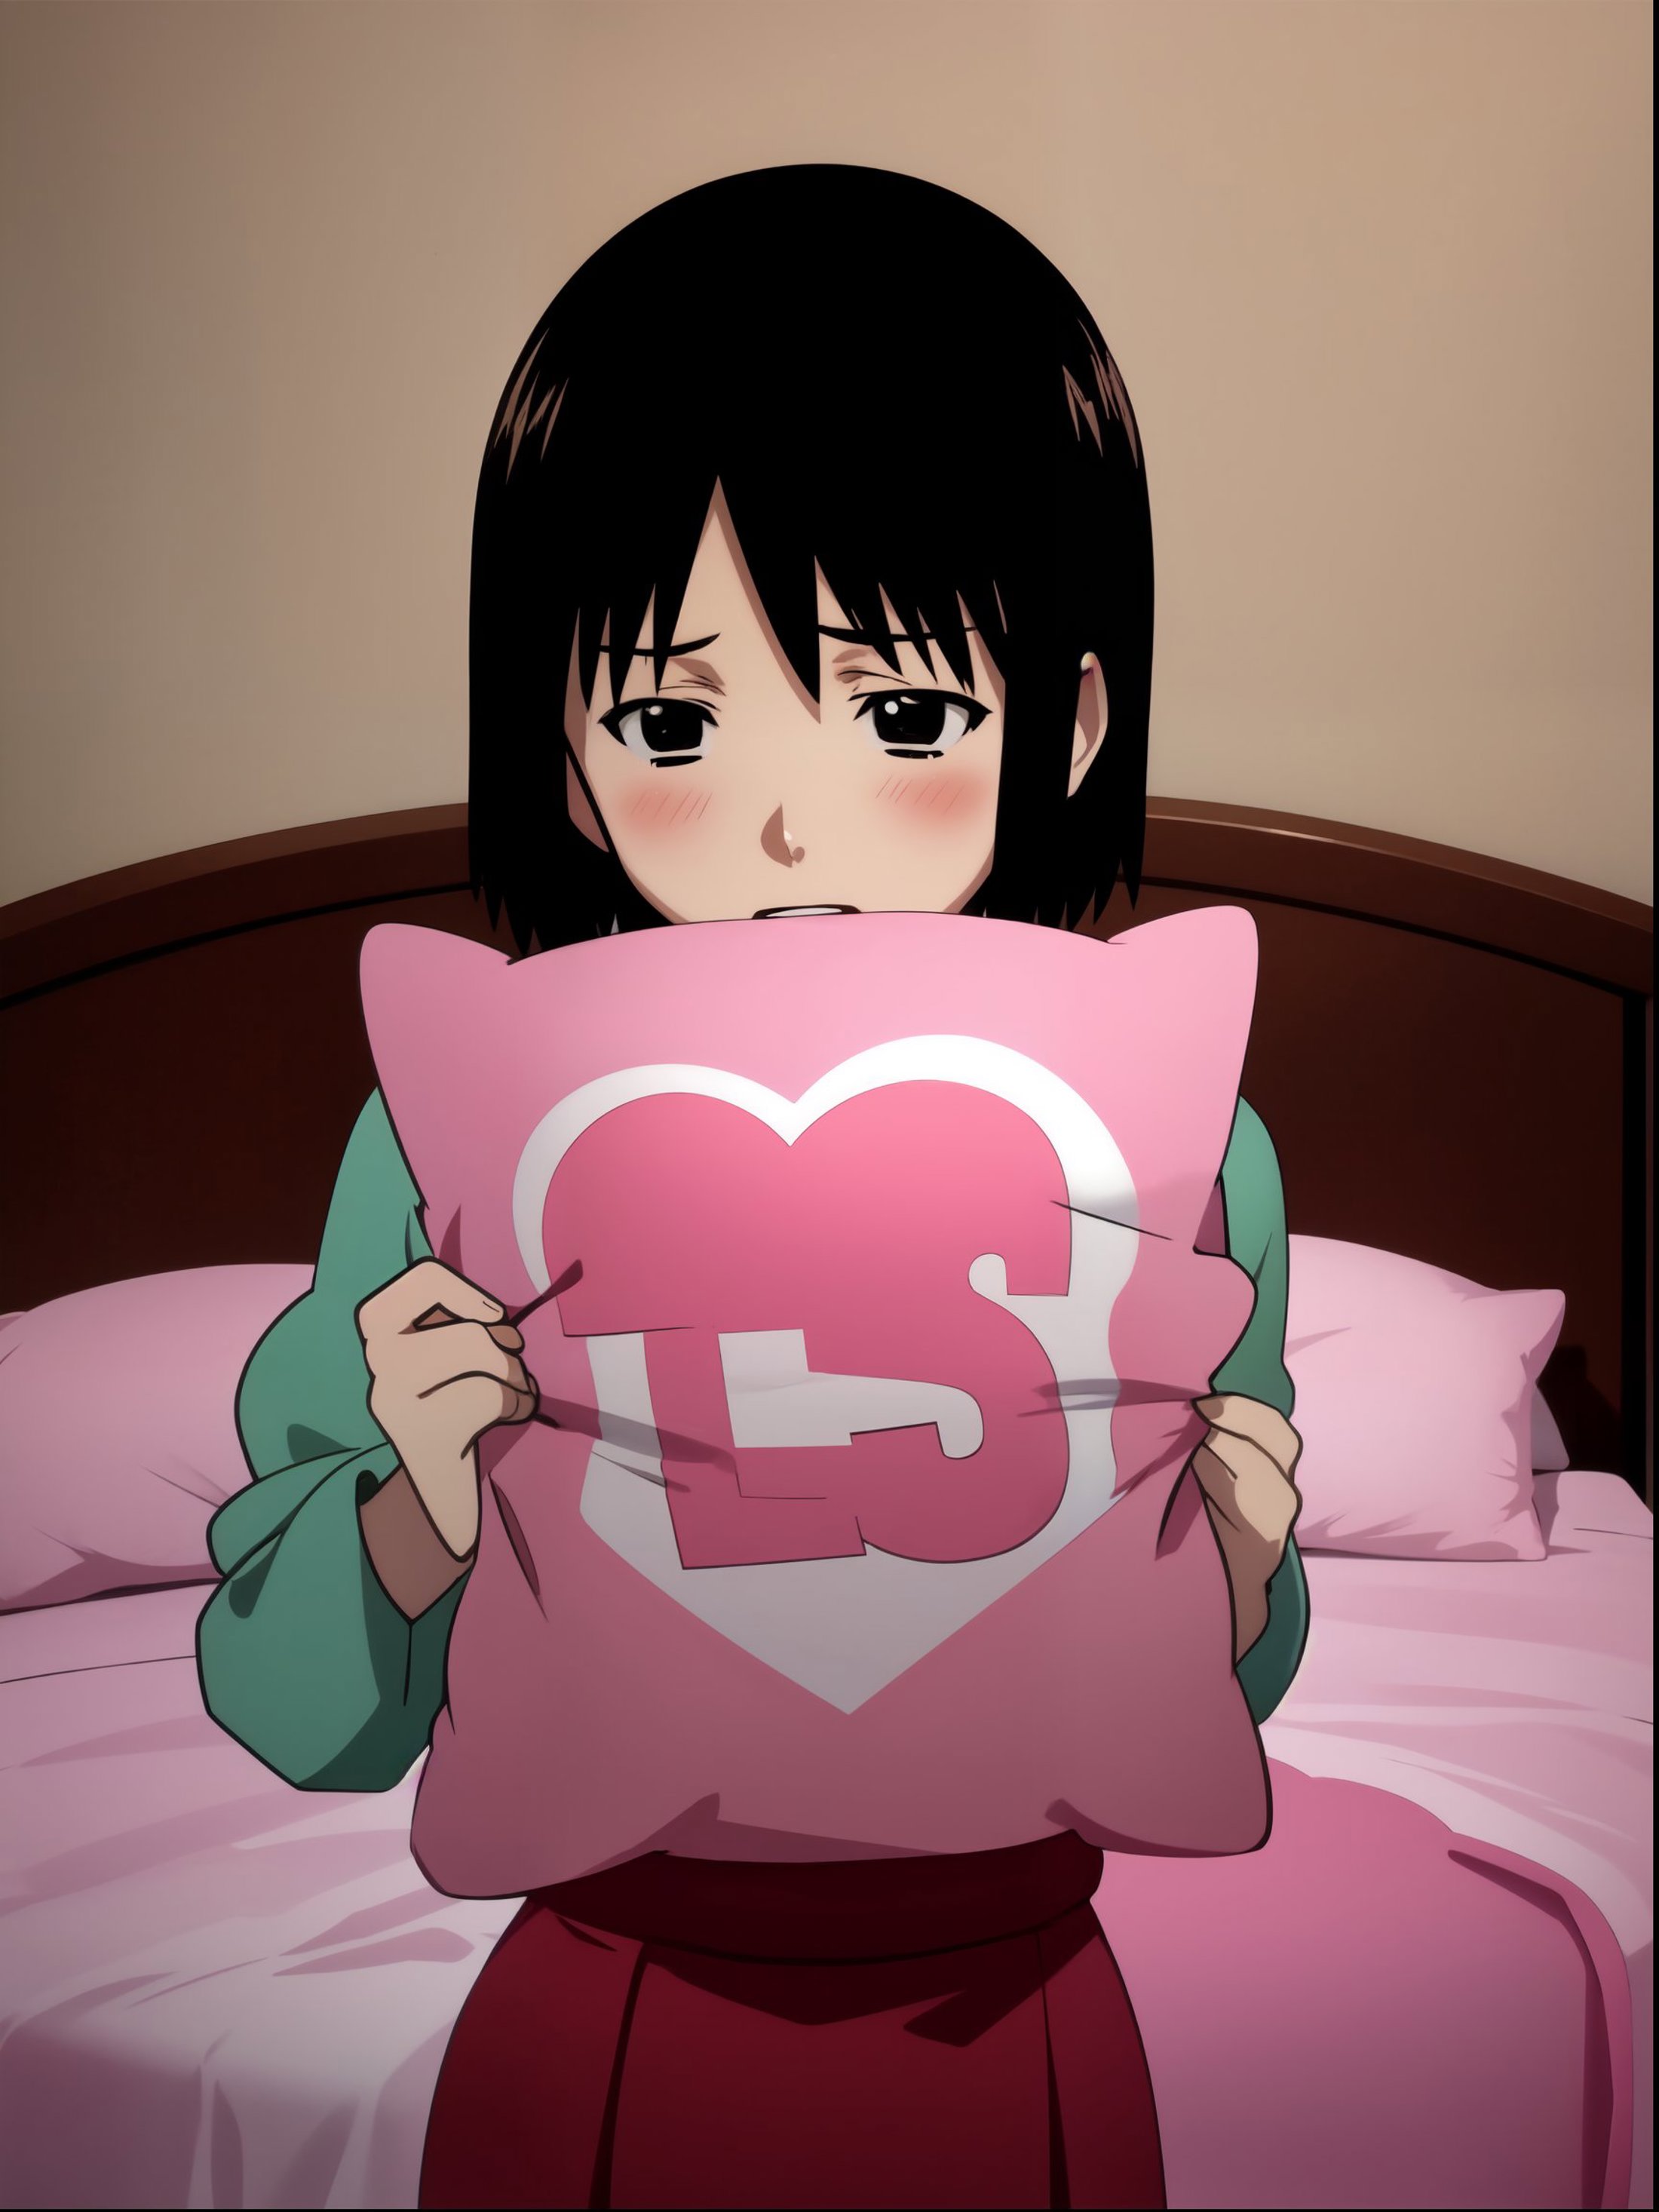 pillow hug/ holding pillow with speech bubble Concept LoRA image by bloknoto